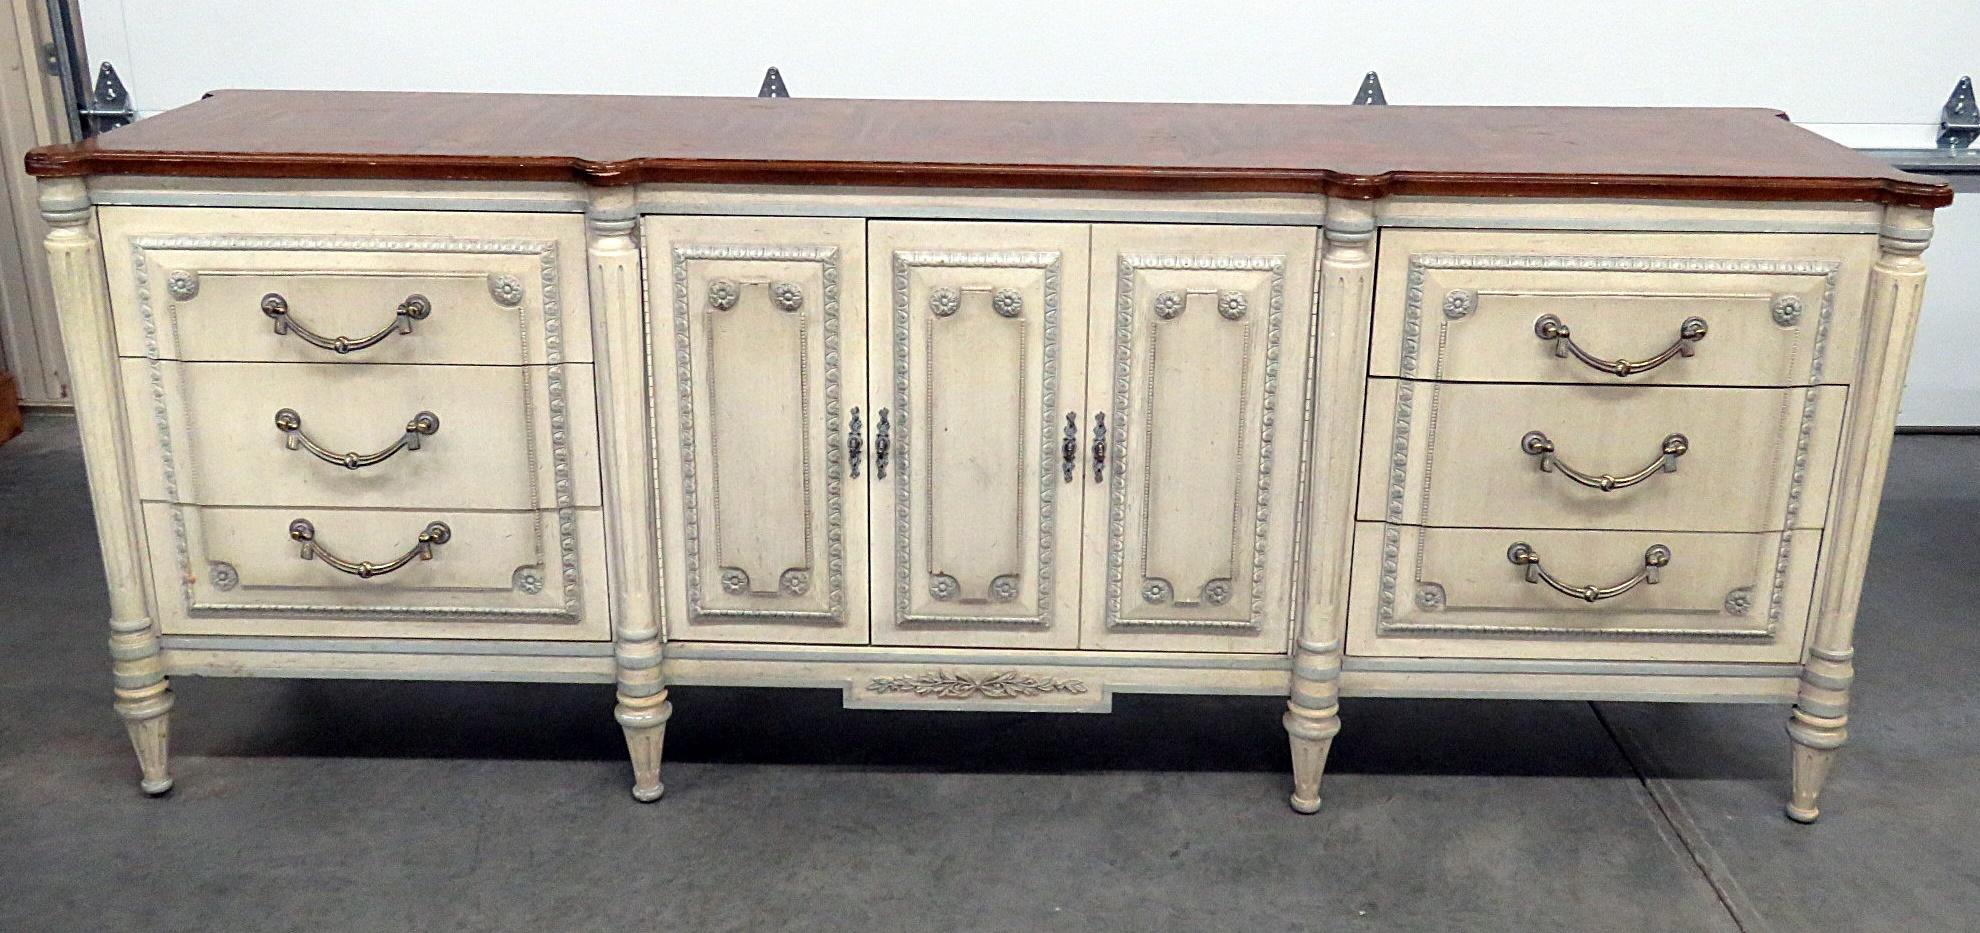 Louis XV style distressed painted sideboard with a fruitwood top, 6 drawers and 2 doors containing 3 drawers.